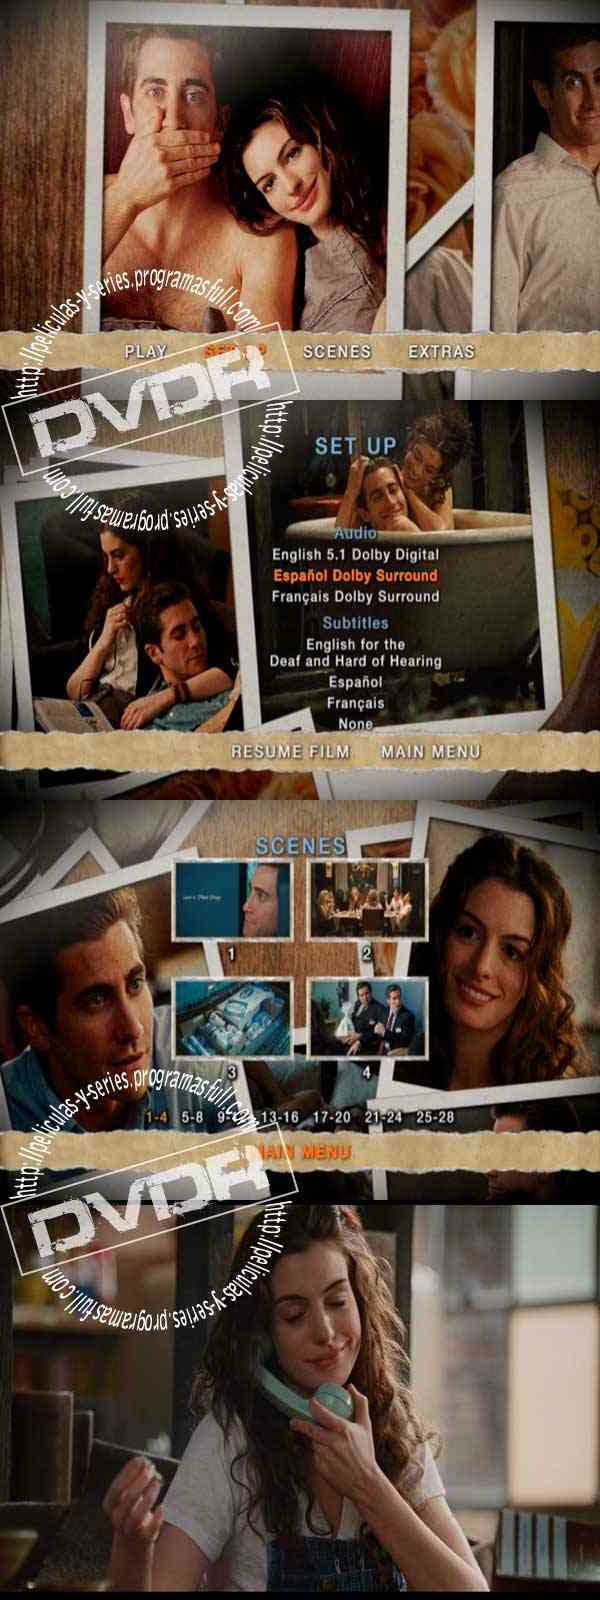 "Love and Other Drugs DVD Latino"